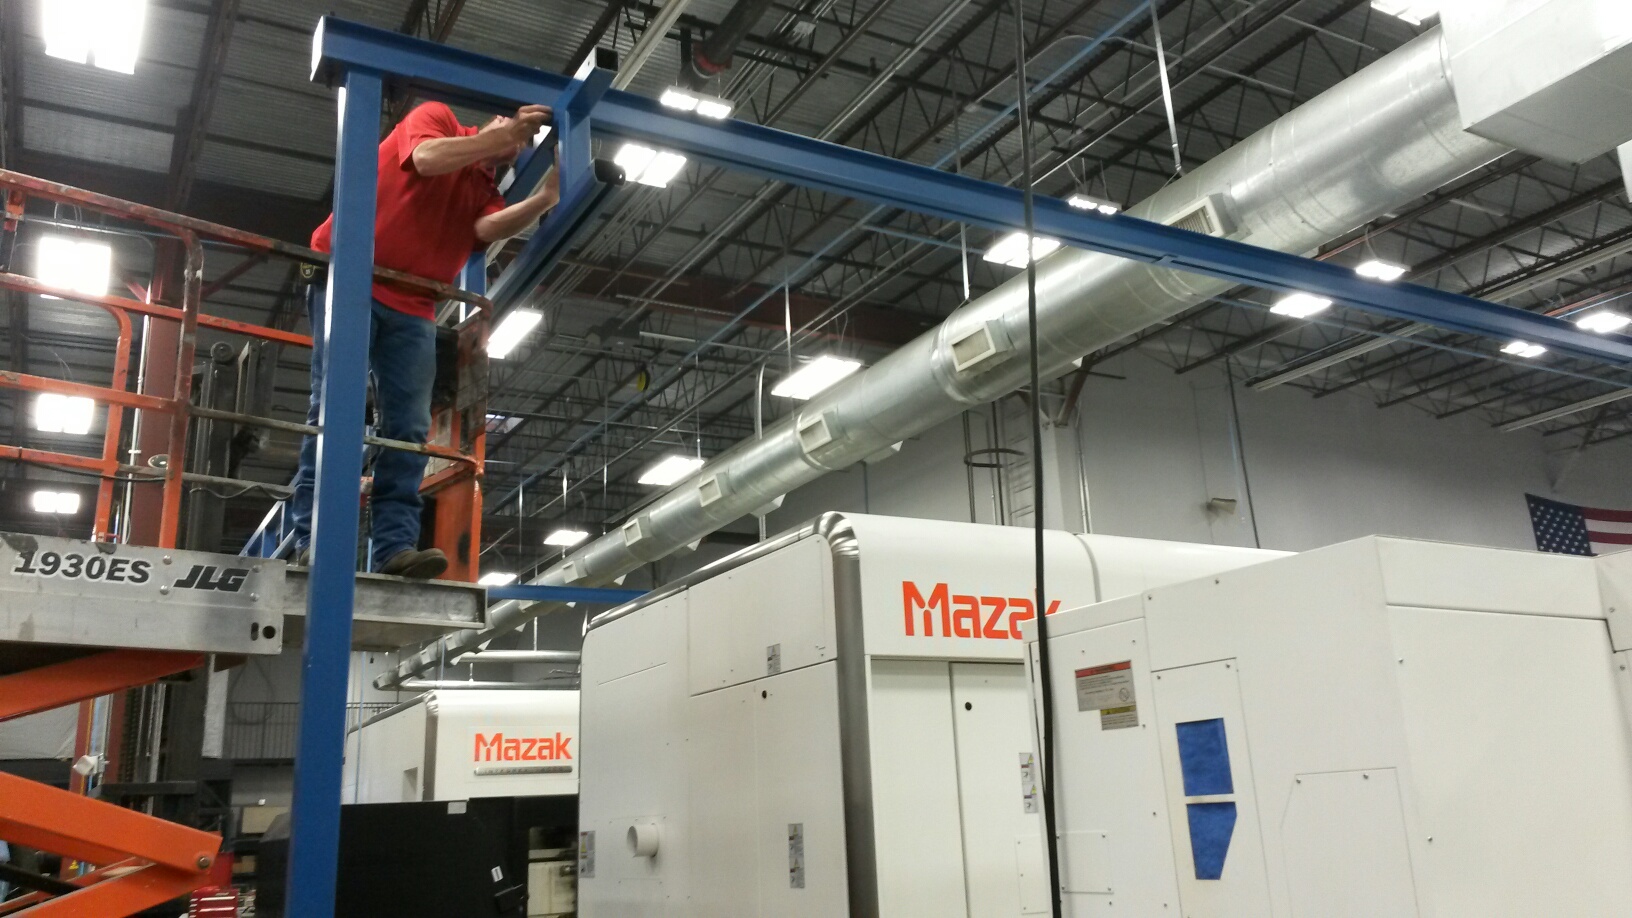 Gorbel Workstation and Jib Crane System Designed for Loading and Unloading Heavy Equipment for the Energy Industry in a CNC Machine Shop in Dallas, TX